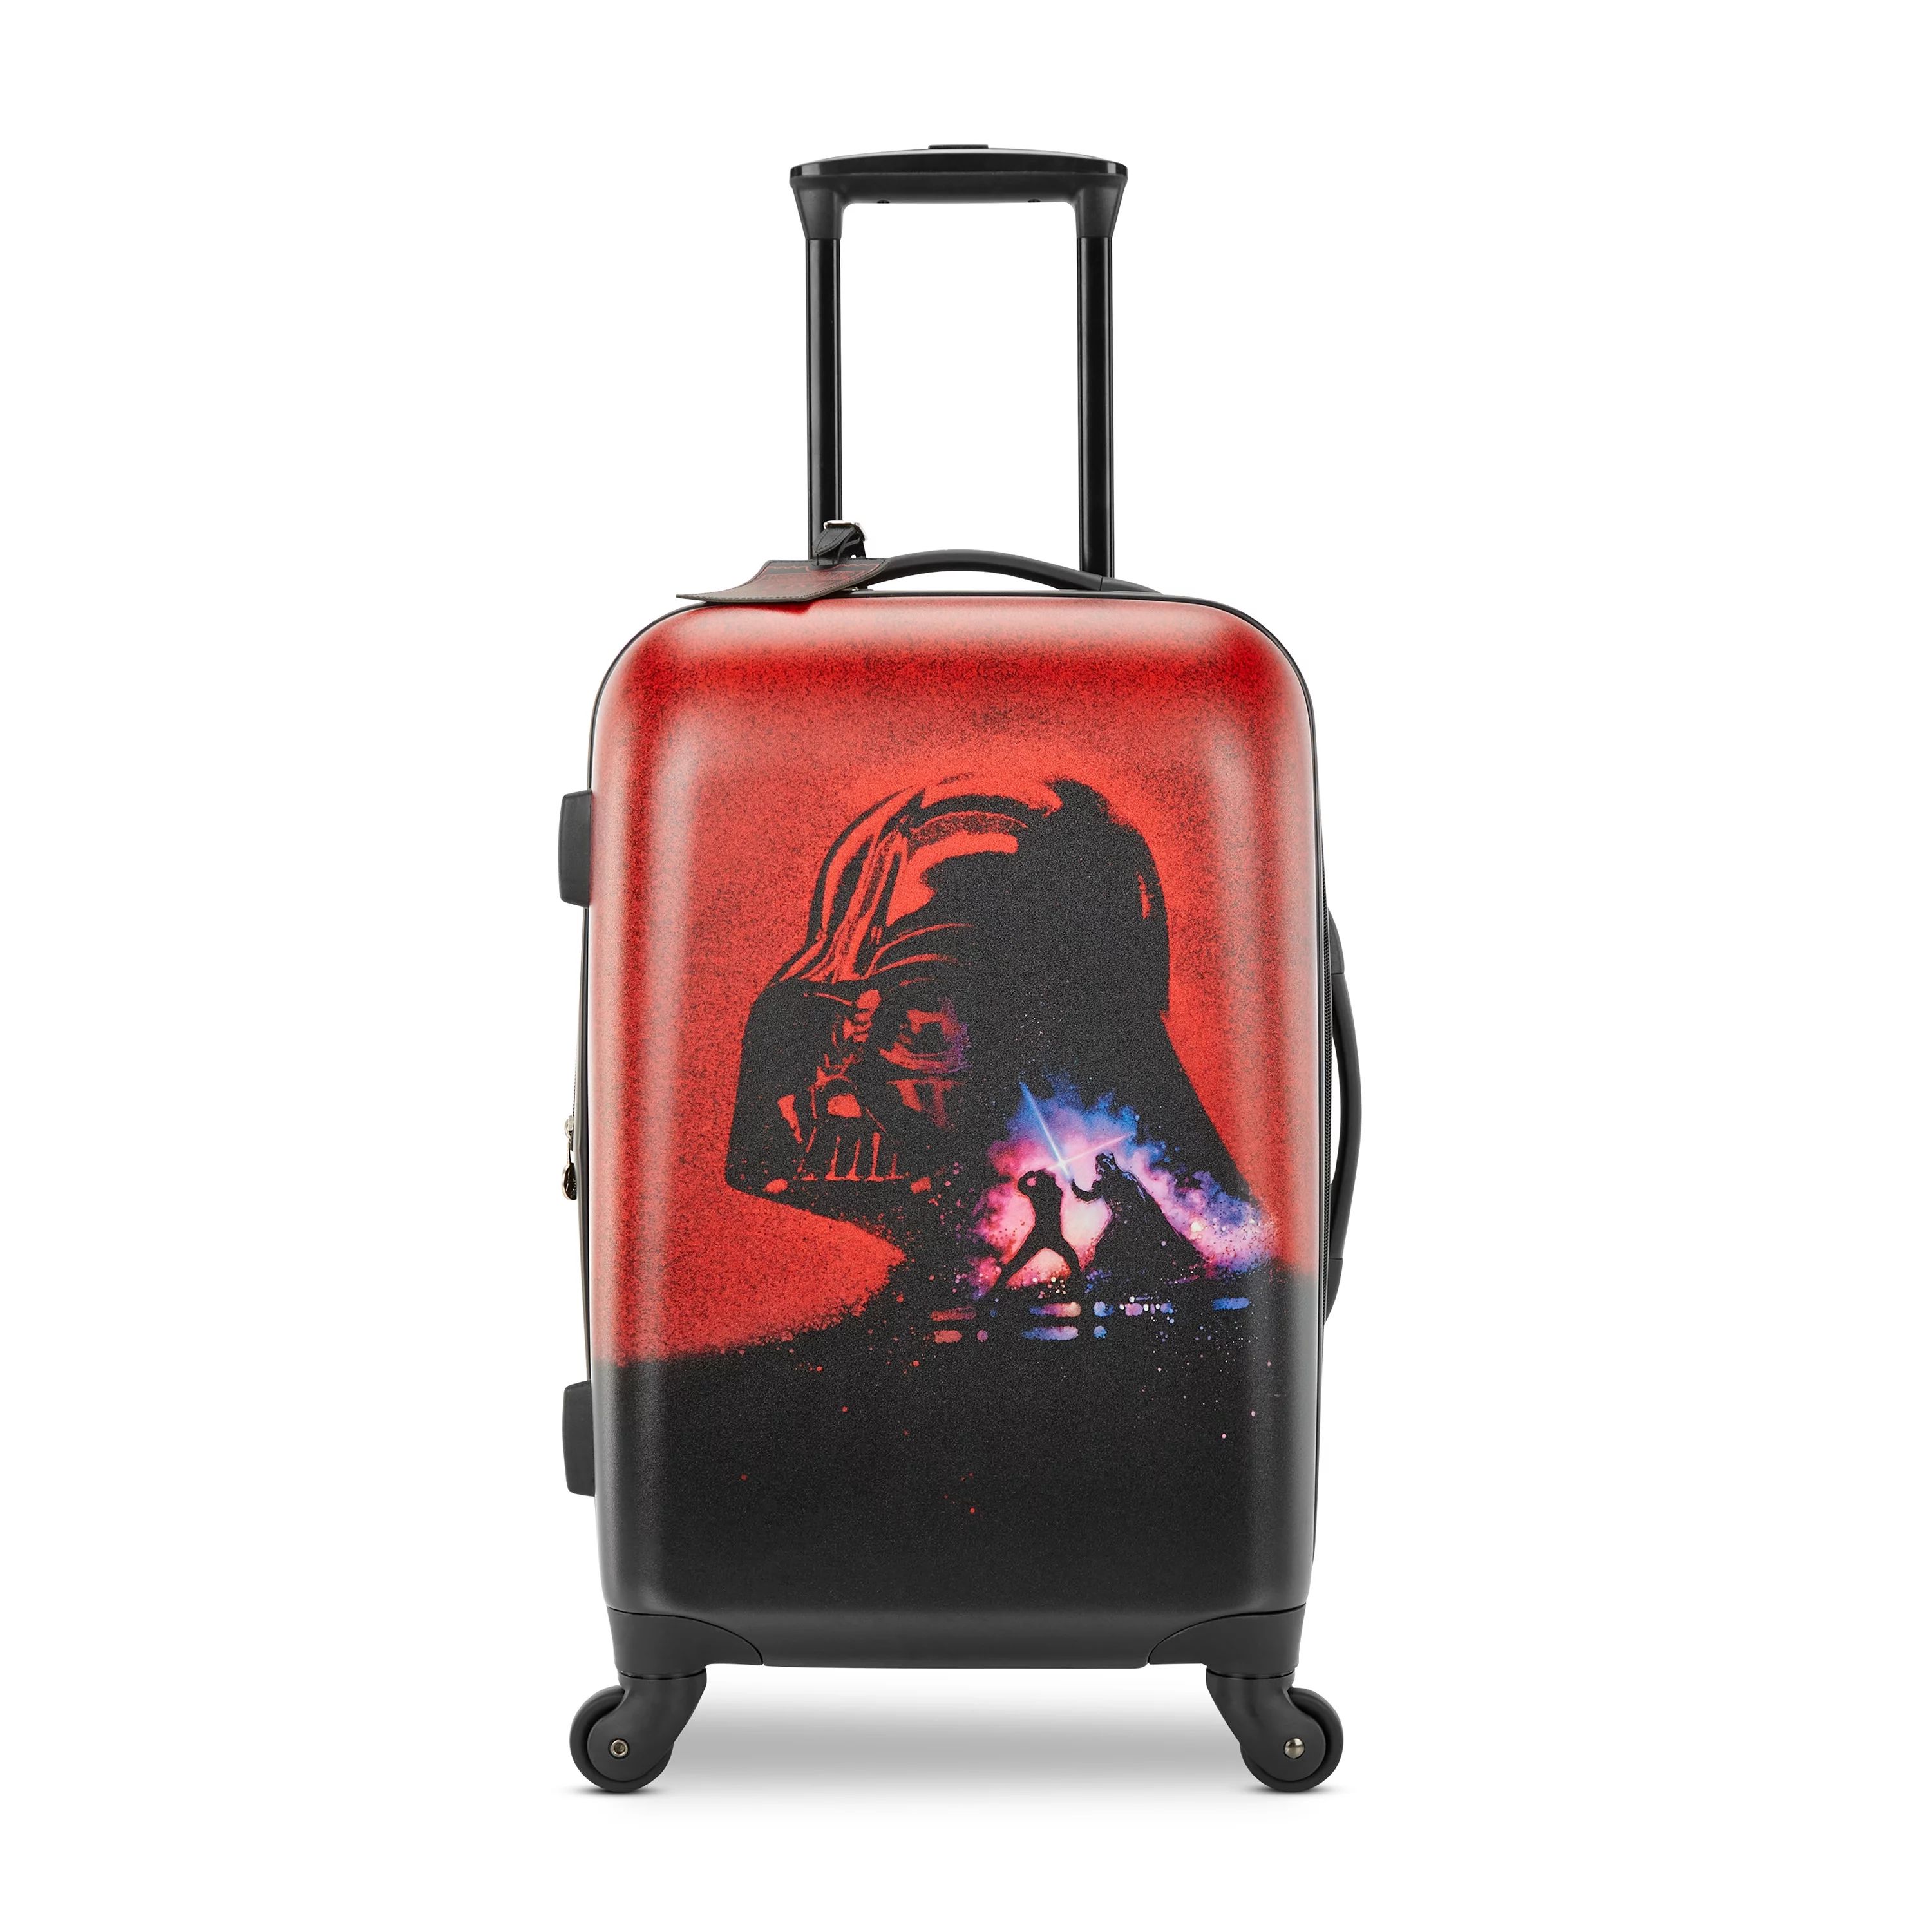 American Tourister 20 in All Ages Hardside Carry-on Spinner Luggage - Star Wars Darth Vader | Walmart (US)